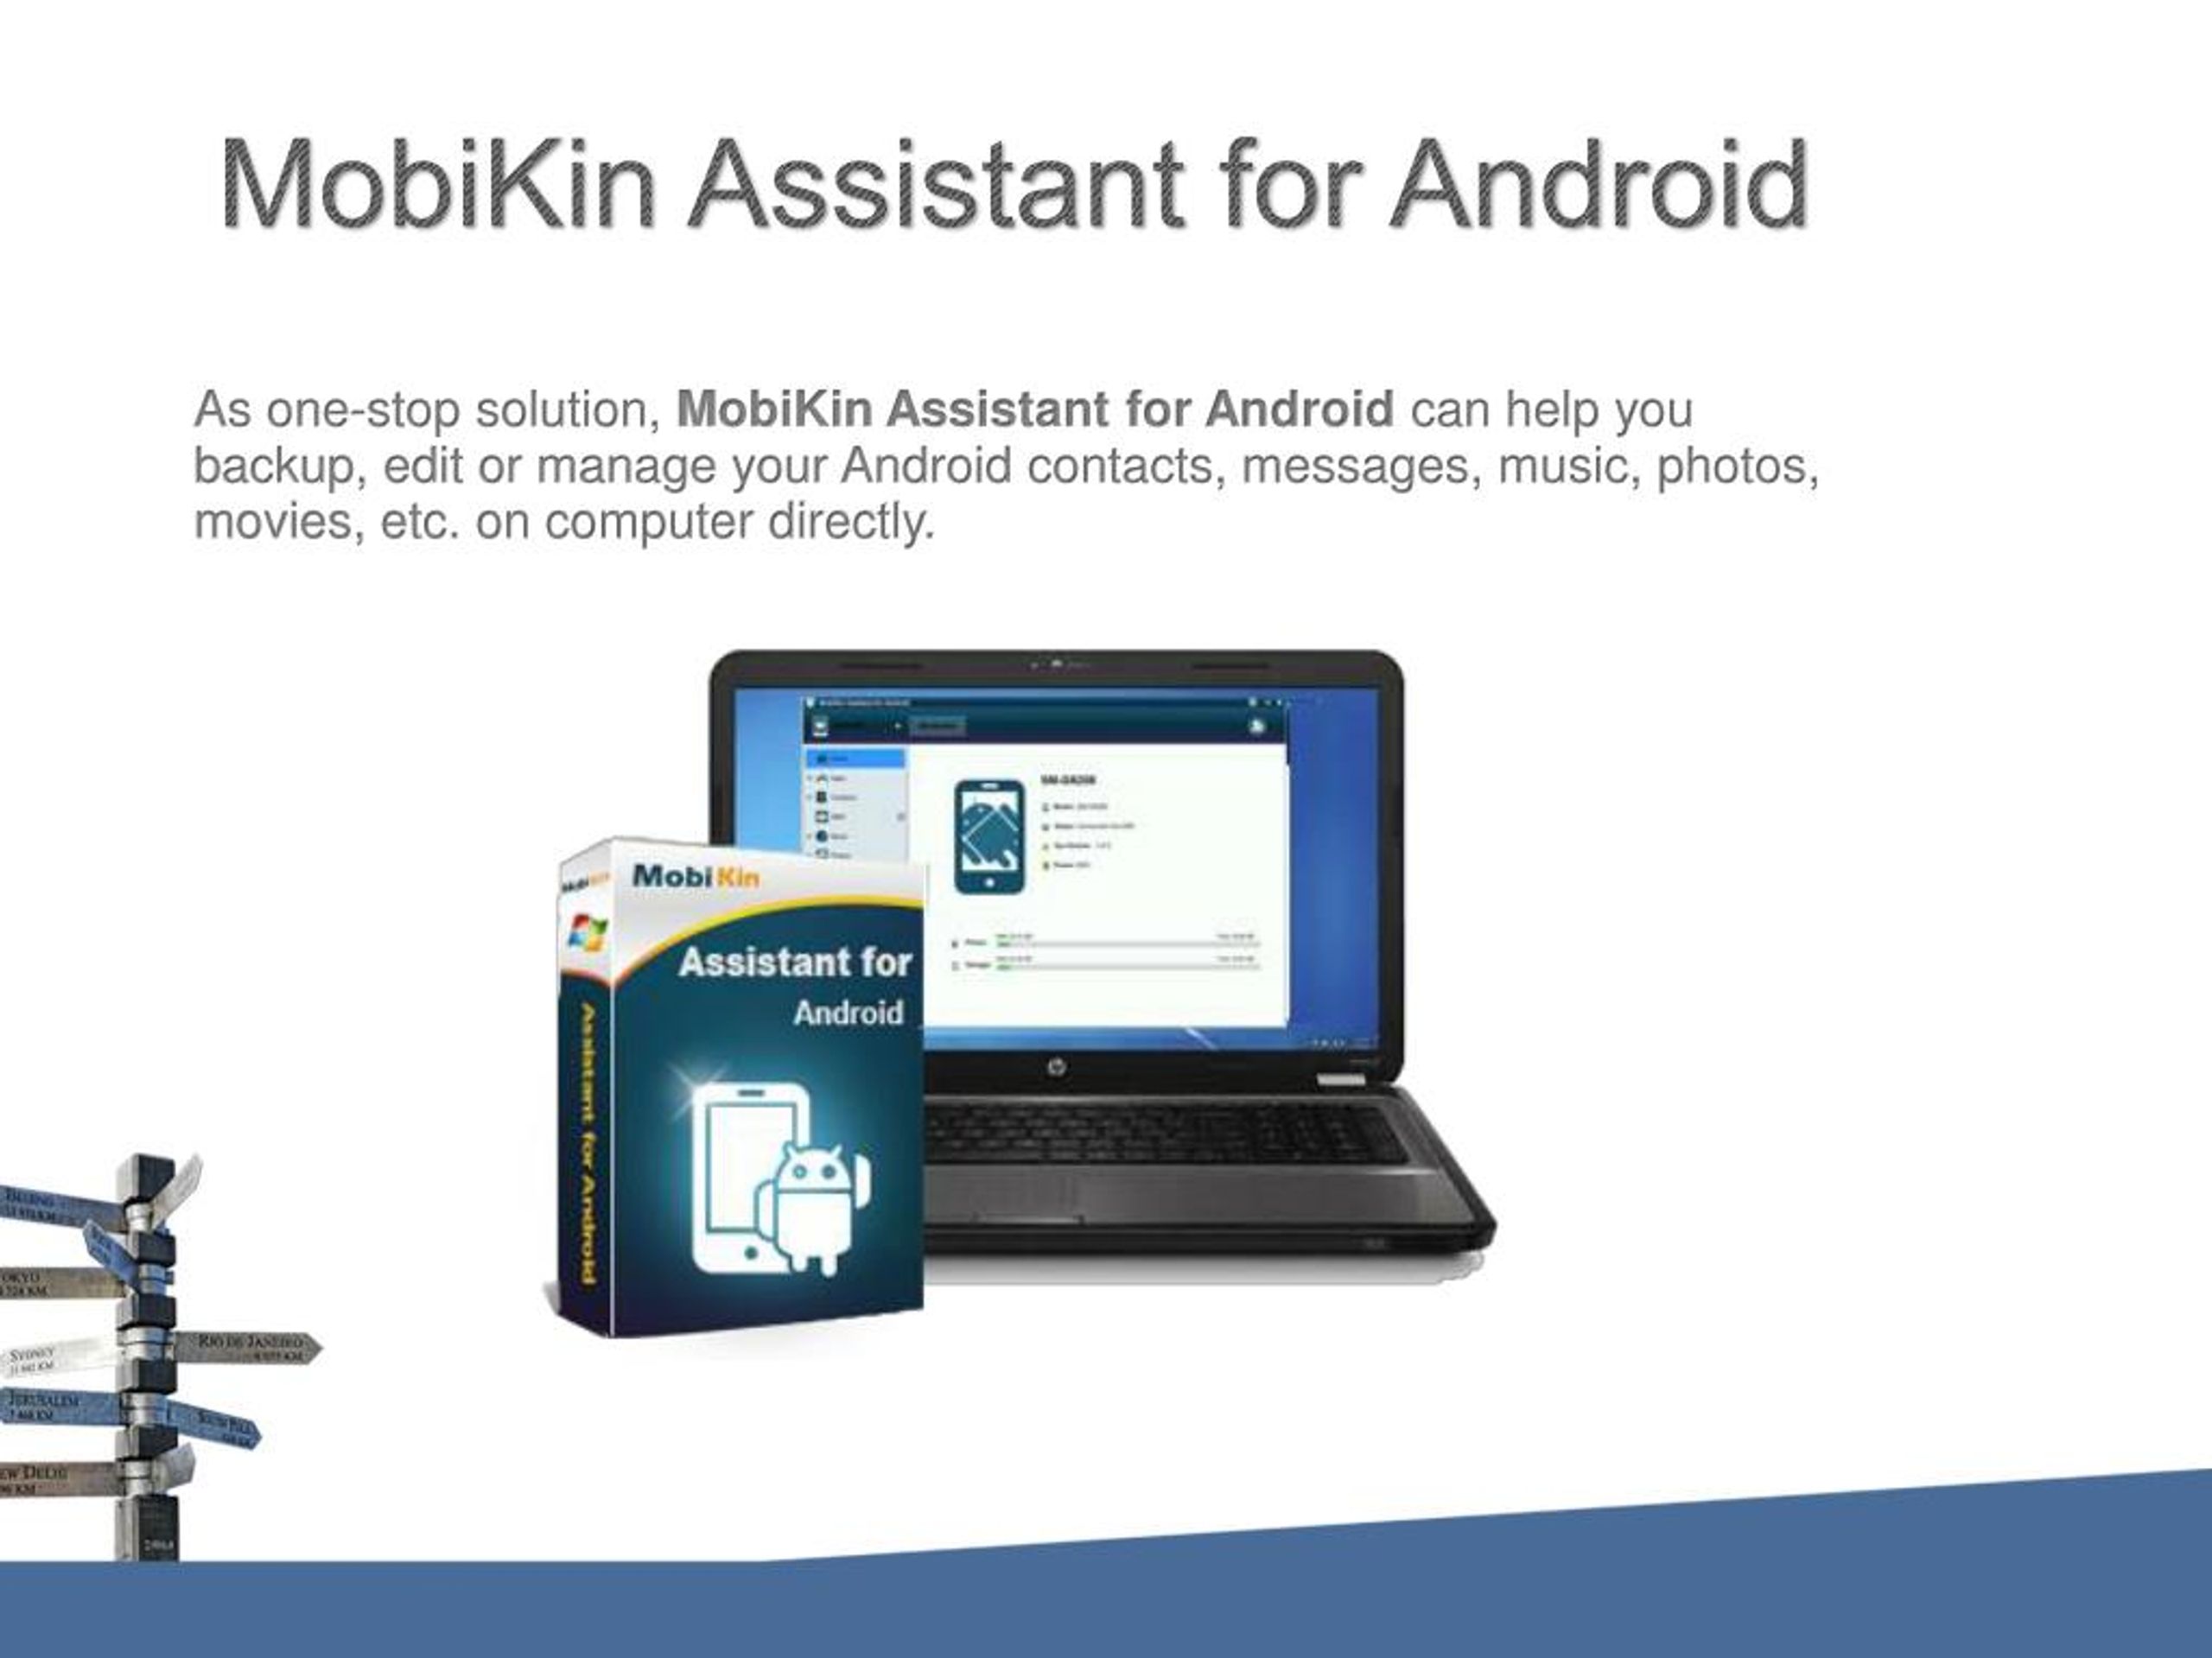 mobikin assistant for android key